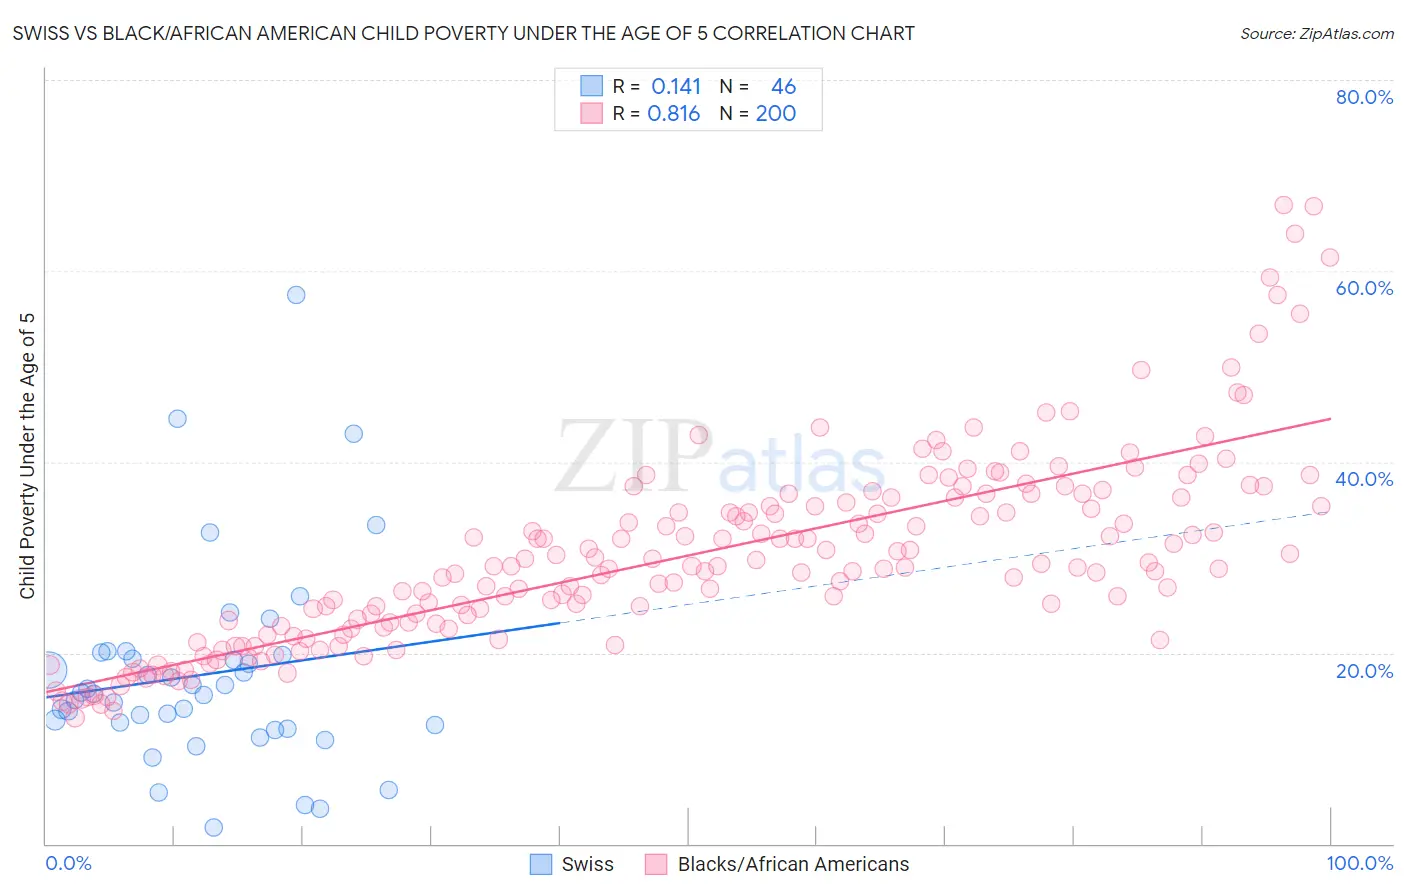 Swiss vs Black/African American Child Poverty Under the Age of 5